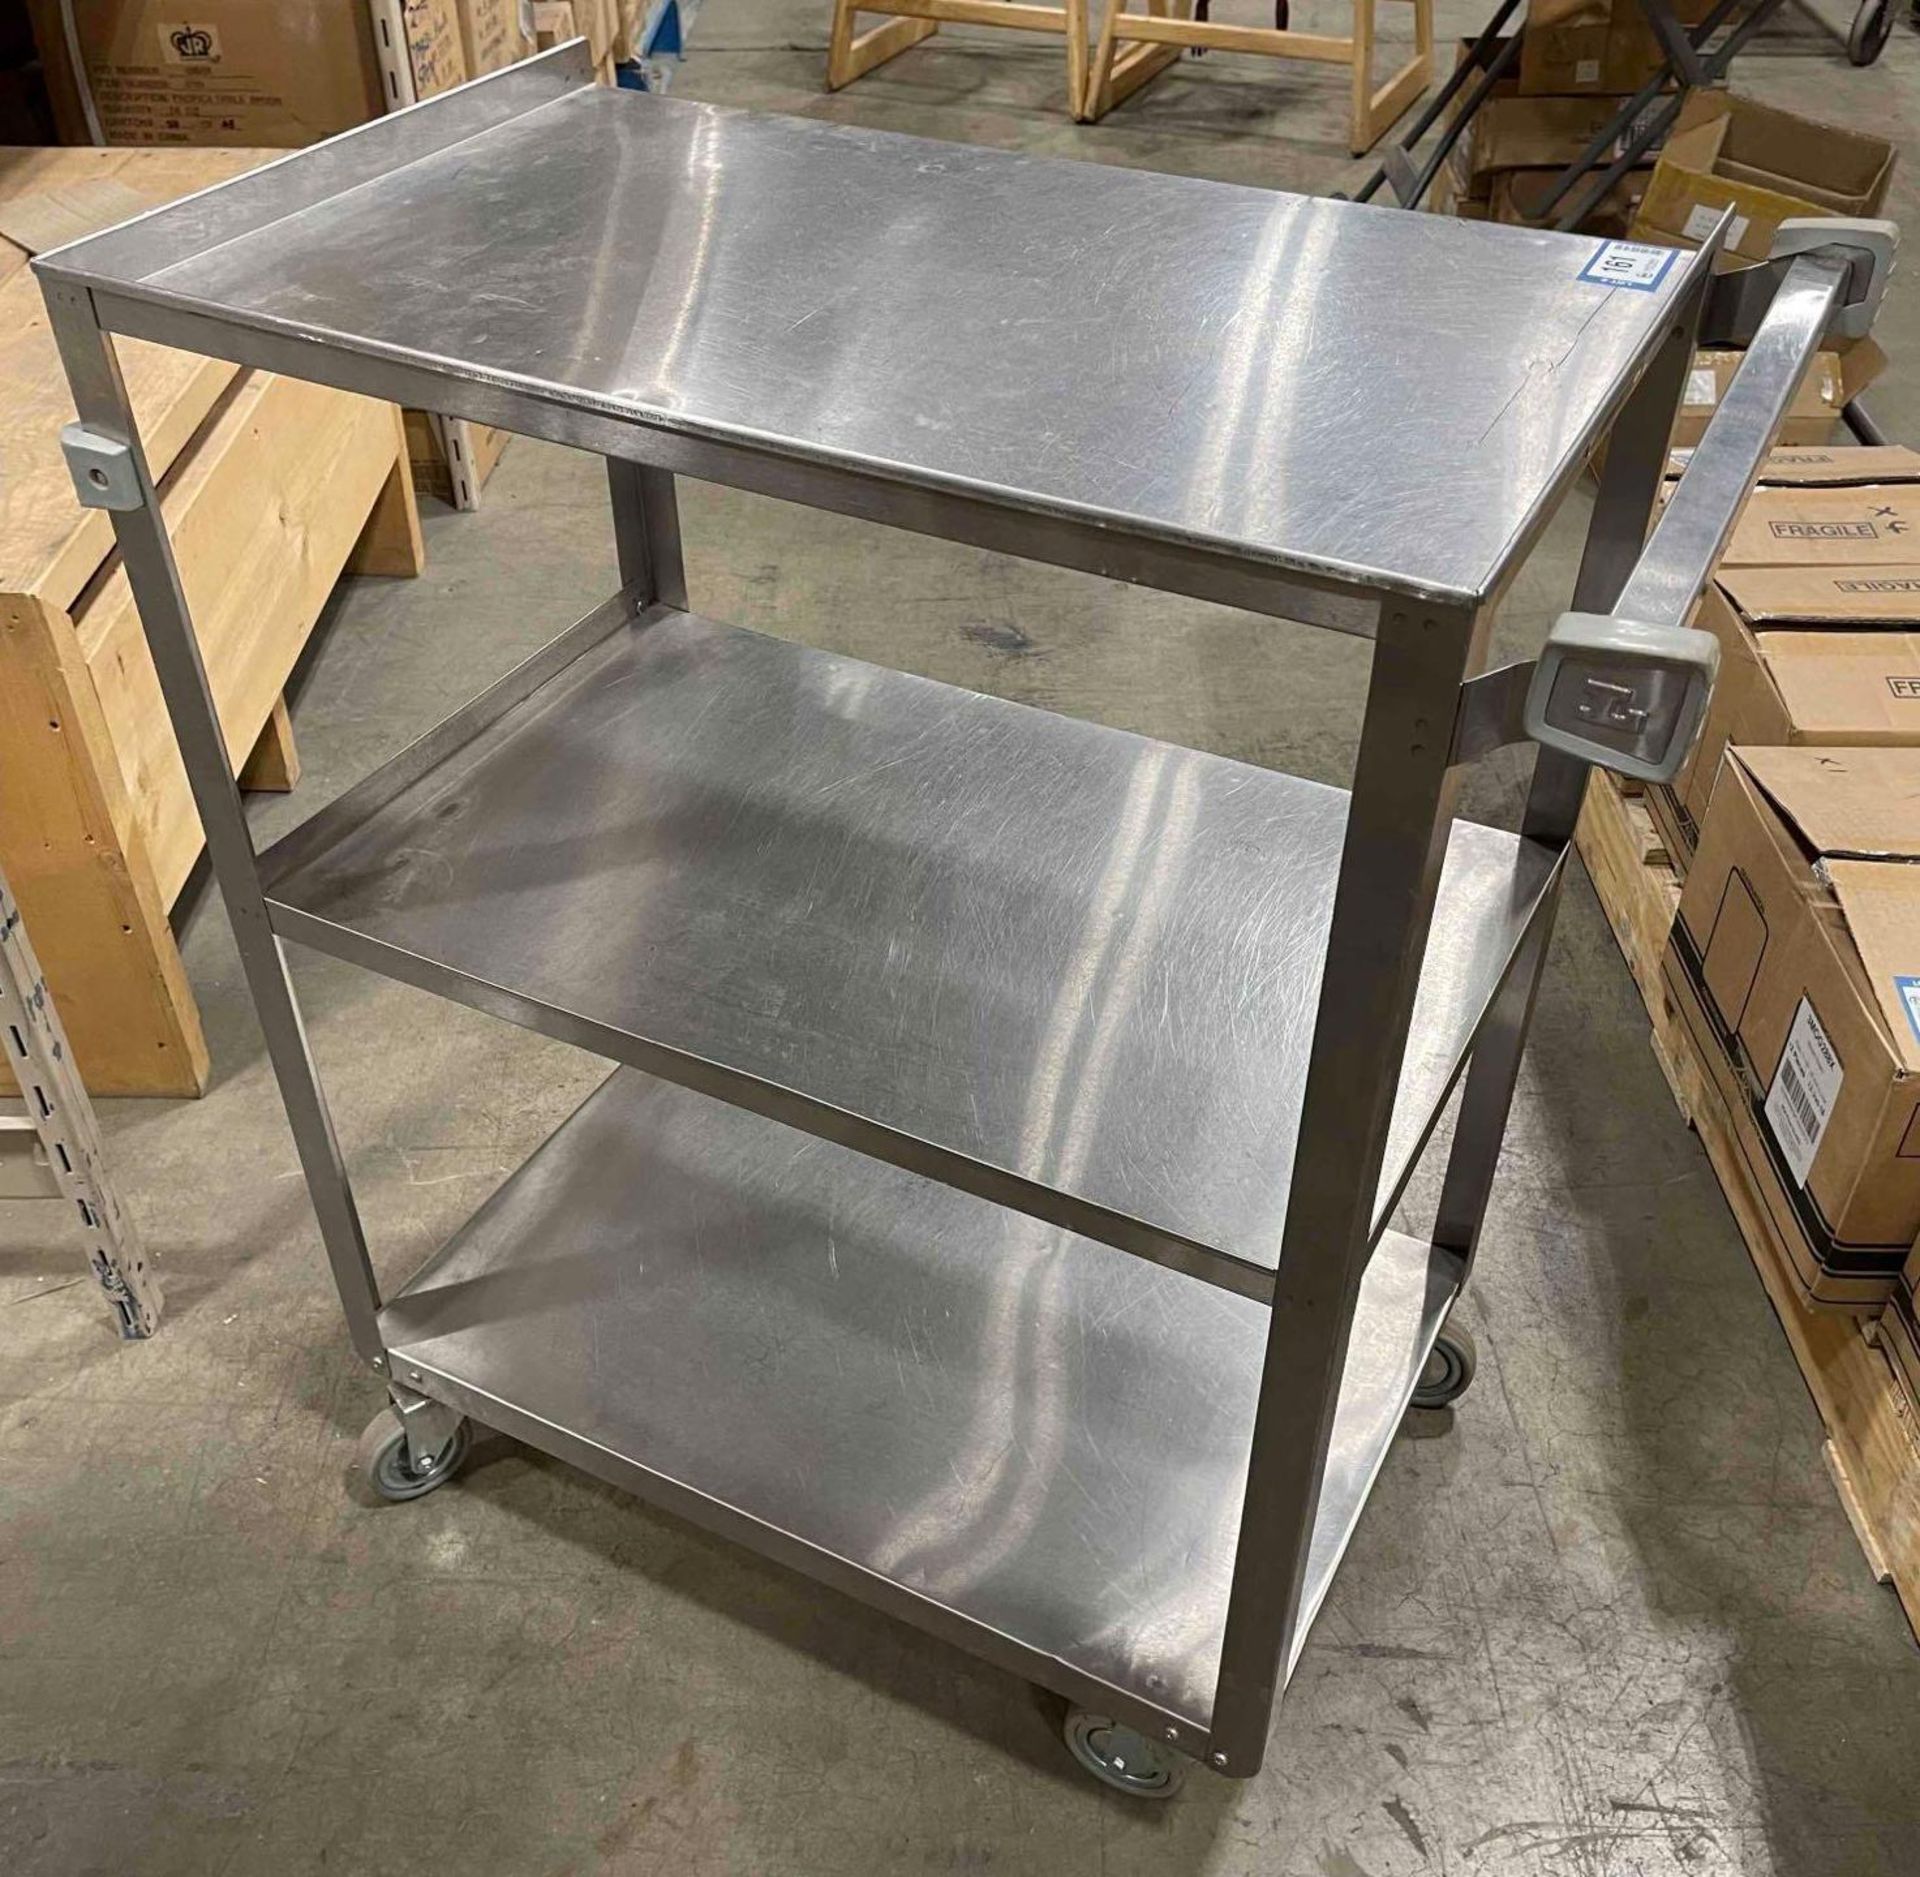 LAKESIDE 311 STAINLESS STEEL UTILITY CART 27" X 16" X 32" 300 LB CAPACITY - Image 4 of 4